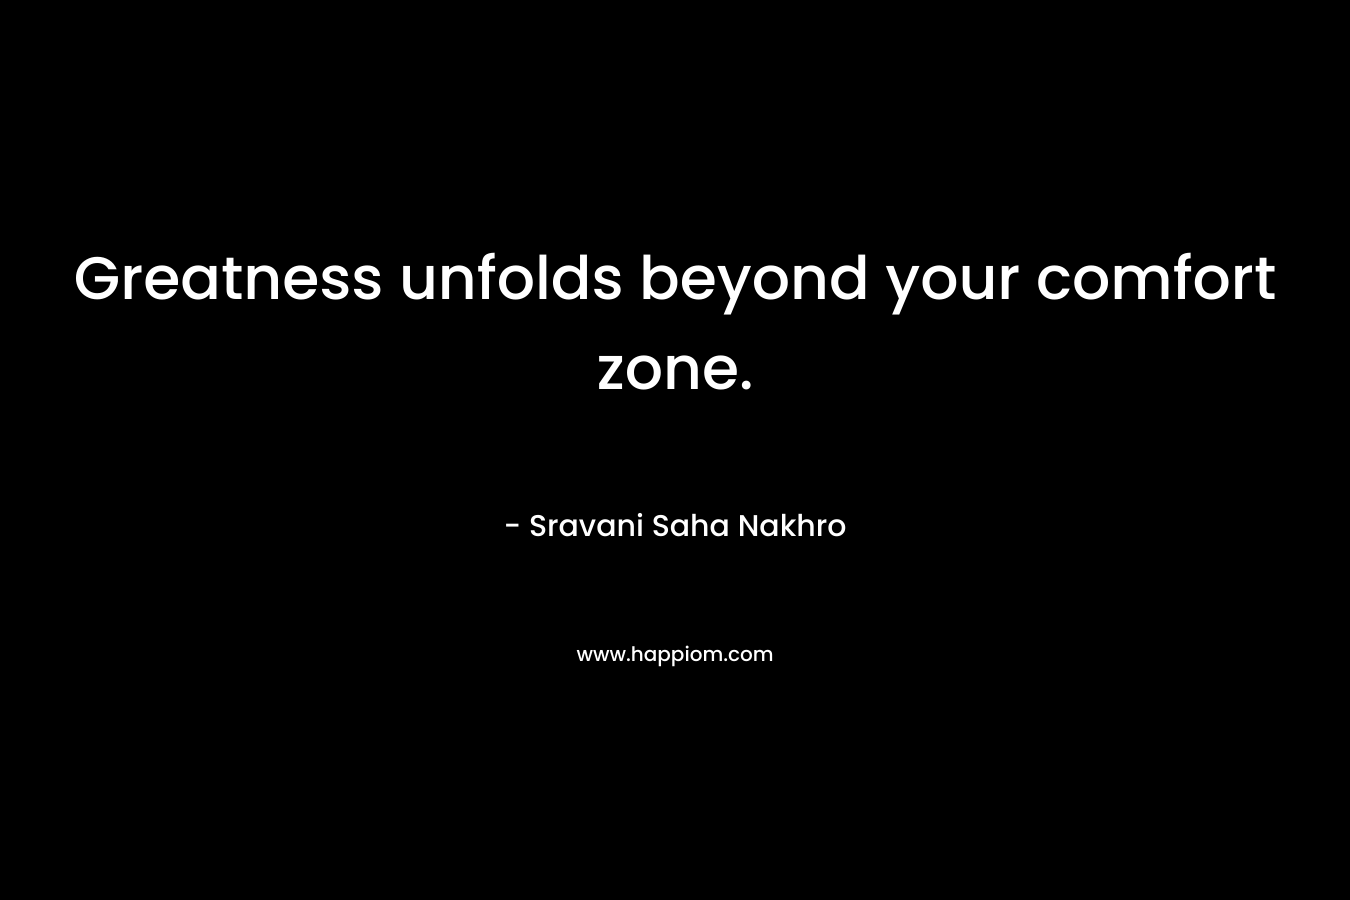 Greatness unfolds beyond your comfort zone.